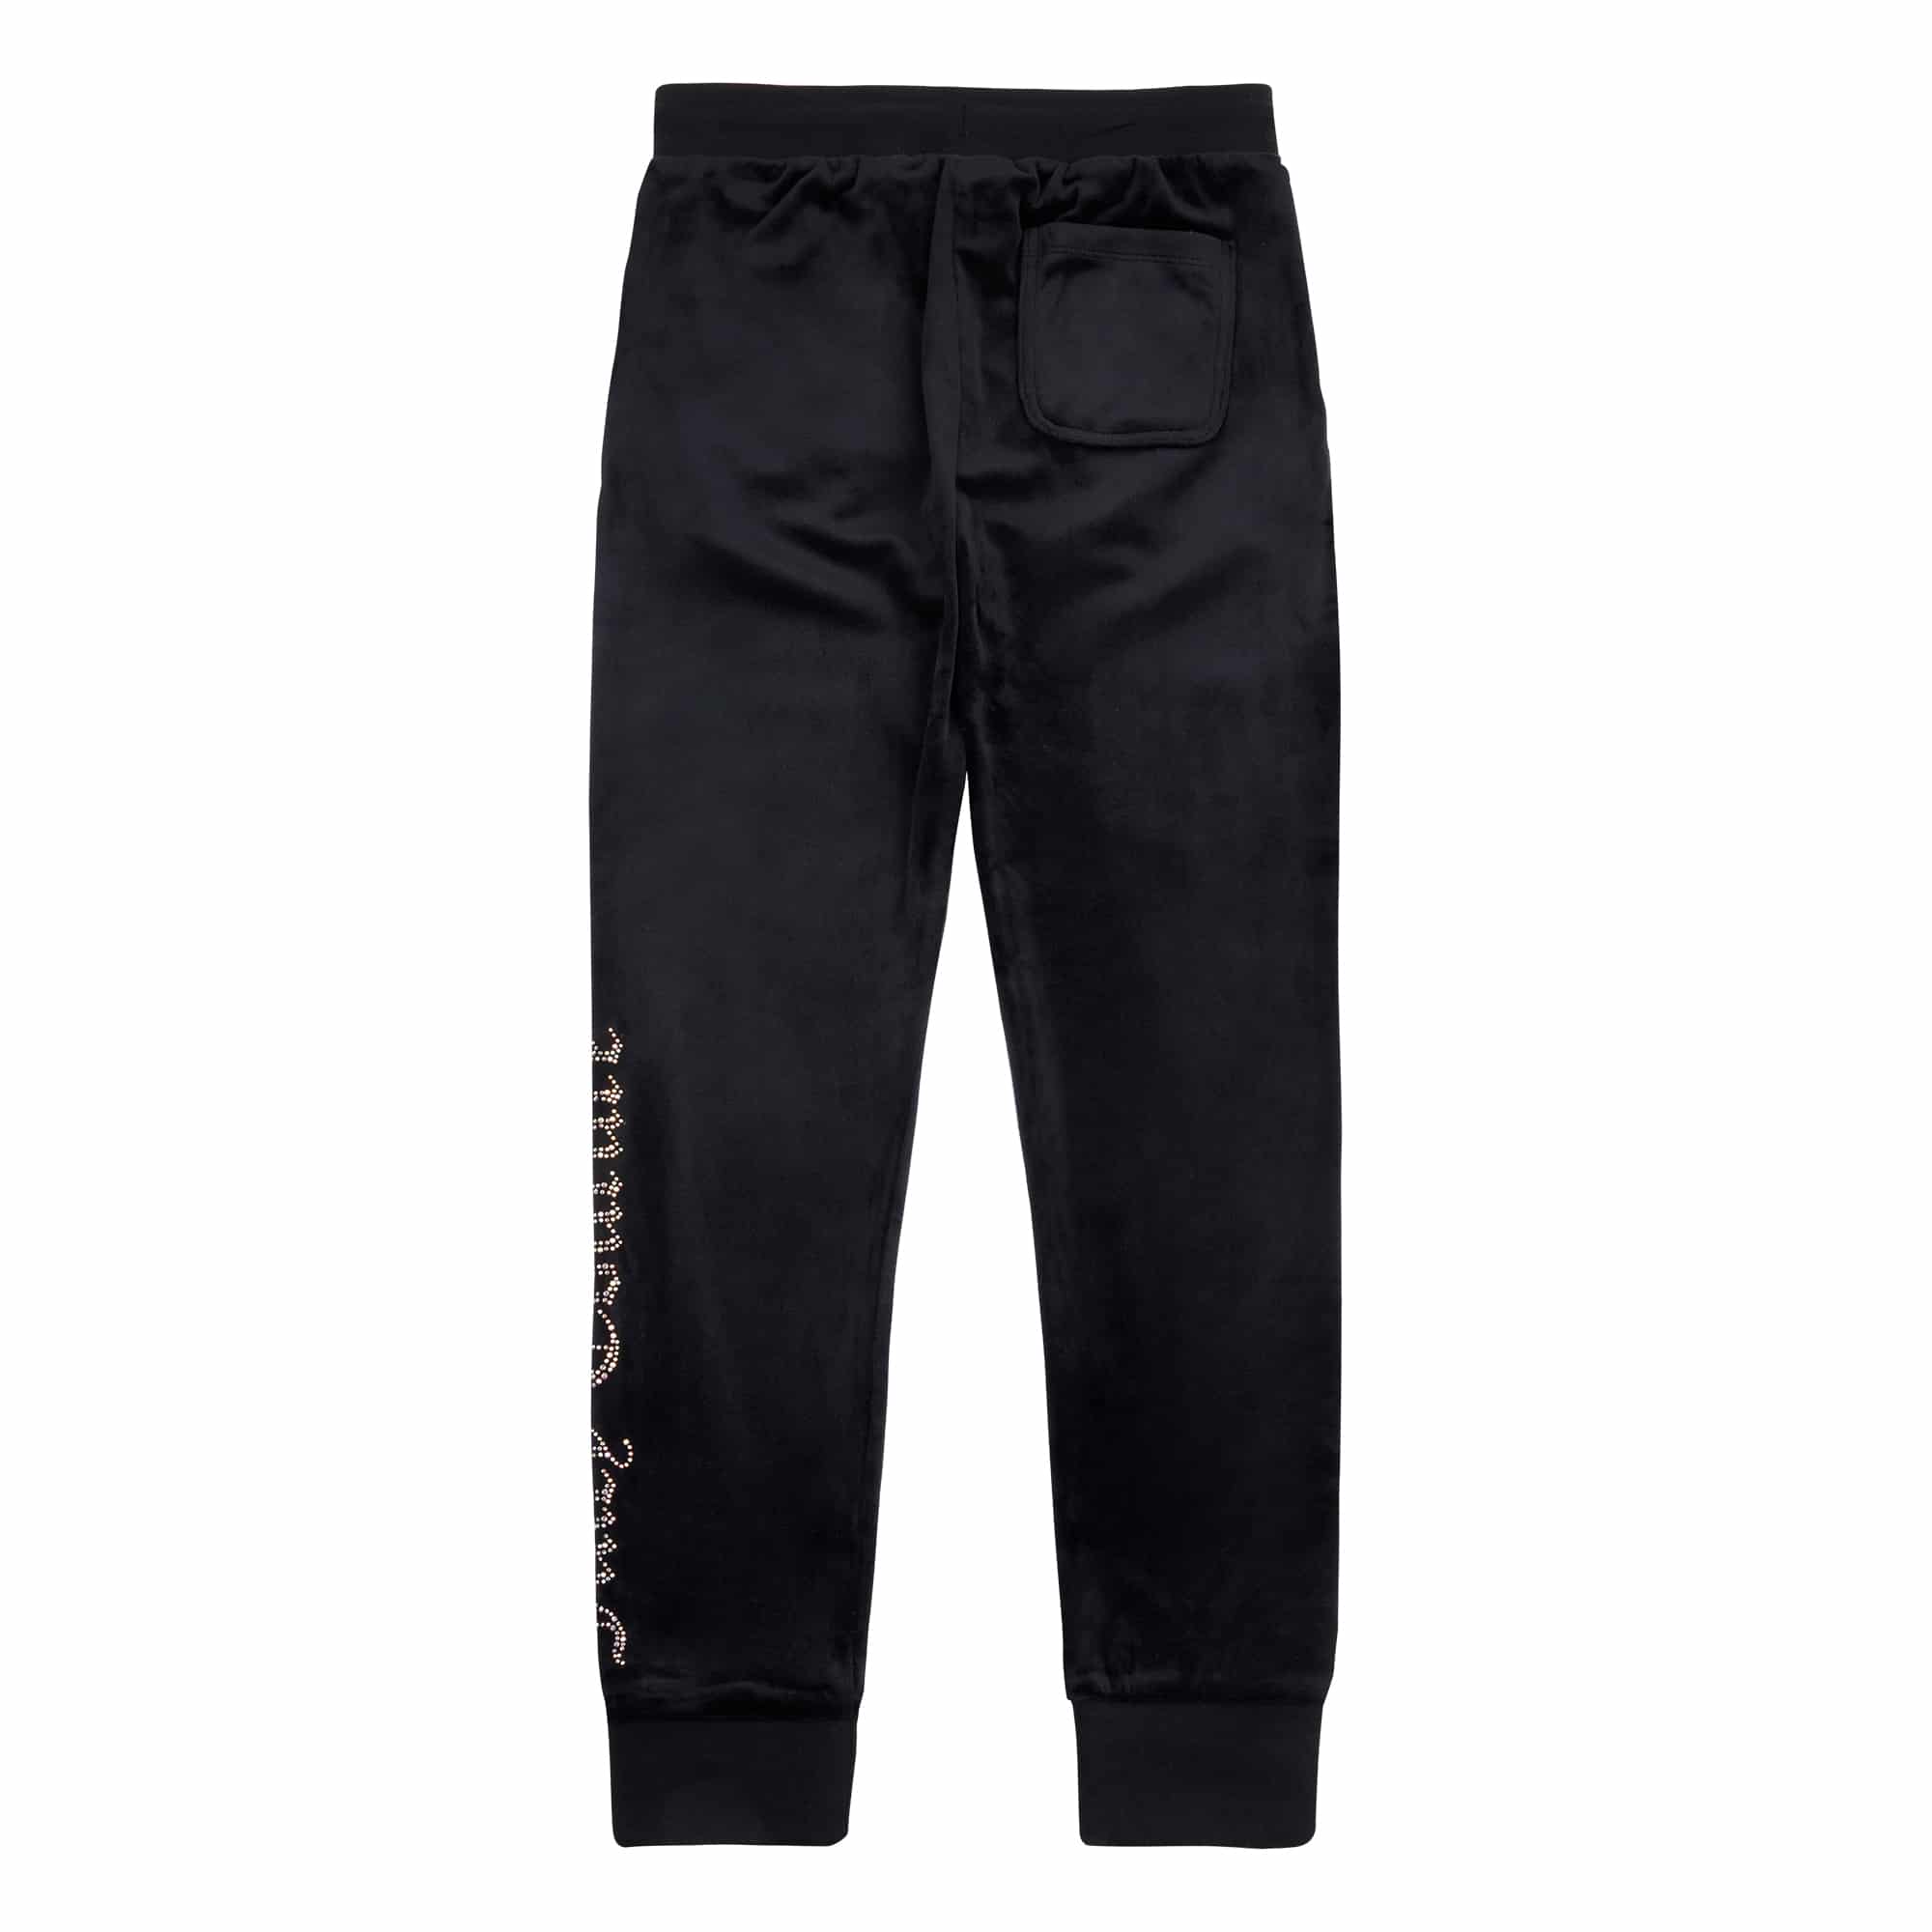 Juicy Couture girls black tracksuit bottoms with embellished logo